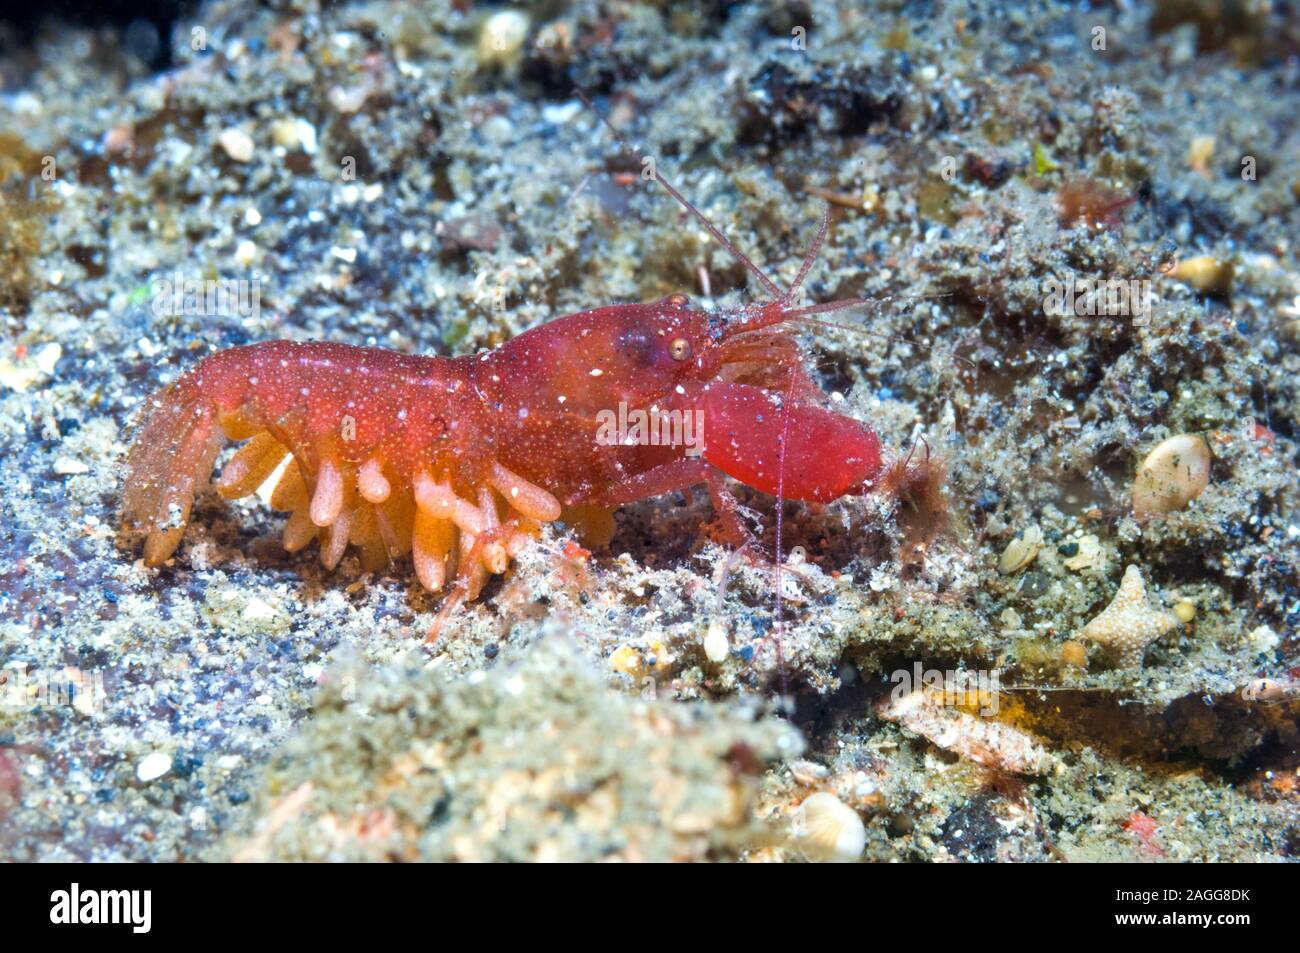 Snapping shrimp with sausage like appendages with ?eggs.  Lembeh Strait, Indonesia.  Indo-West Pacific. Stock Photo